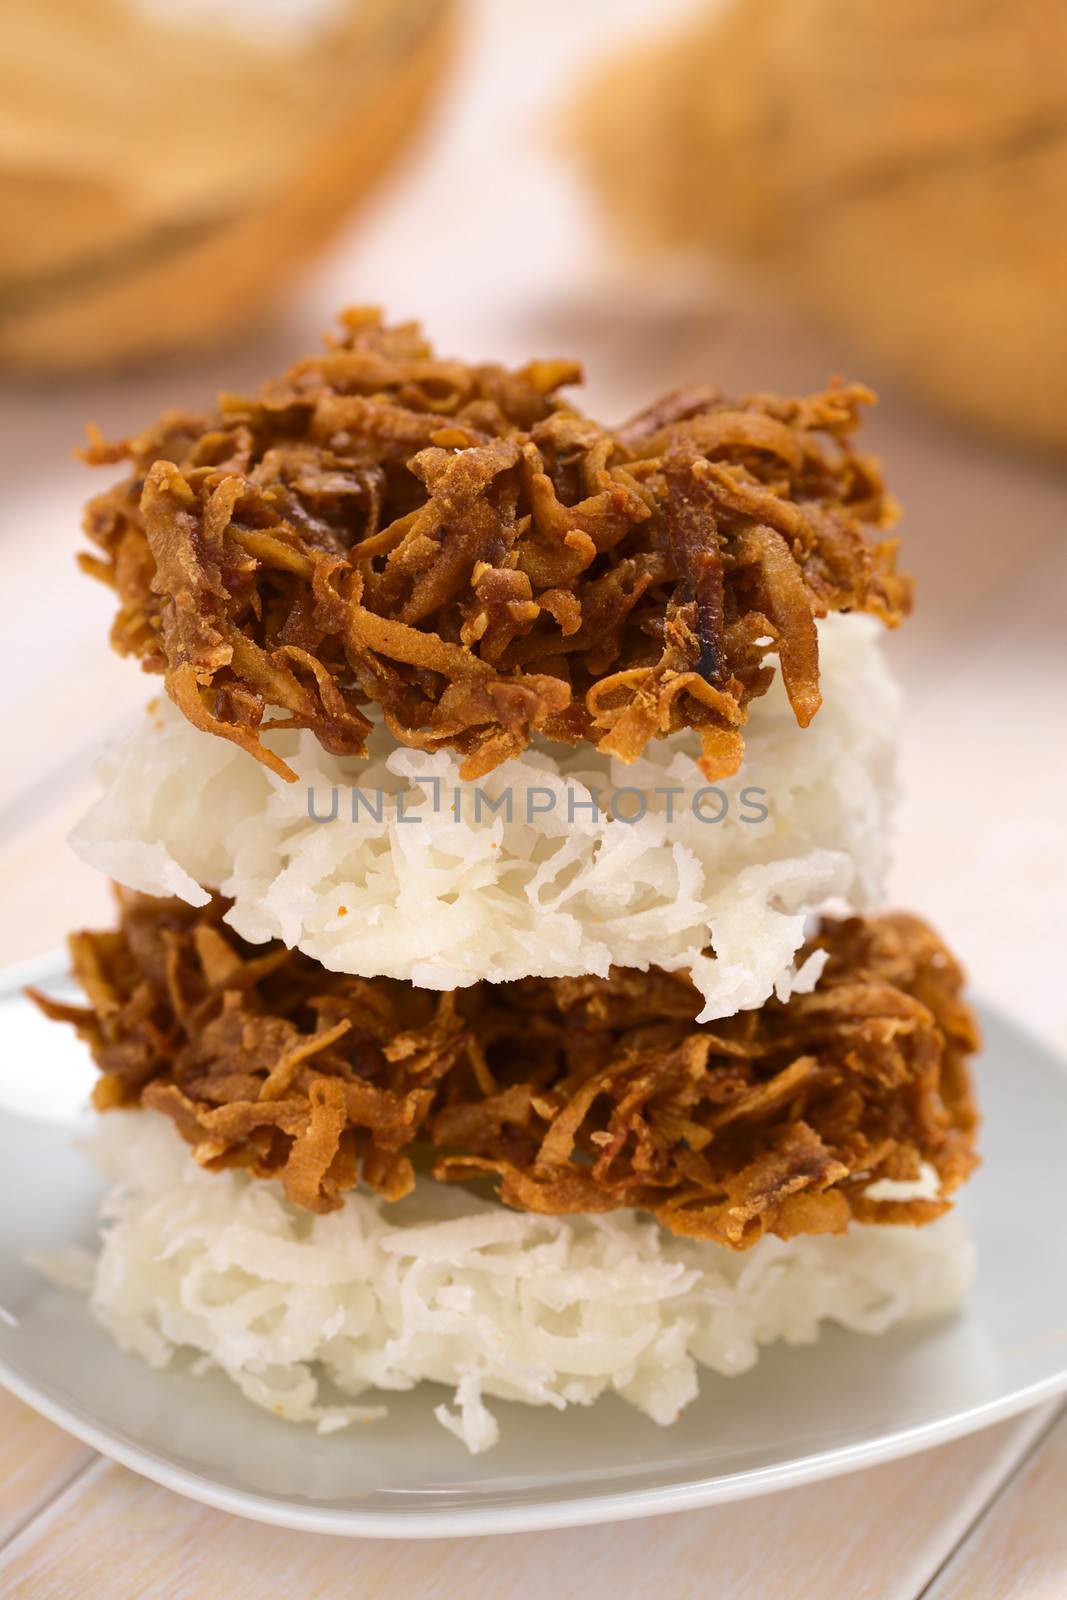 Peruvian cocadas, a traditional coconut dessert sold usually on the streets, made of grated coconut and white or brown sugar, which gives the different coloring of the sweet (Selective Focus, Focus on the front of the two upper cocadas)